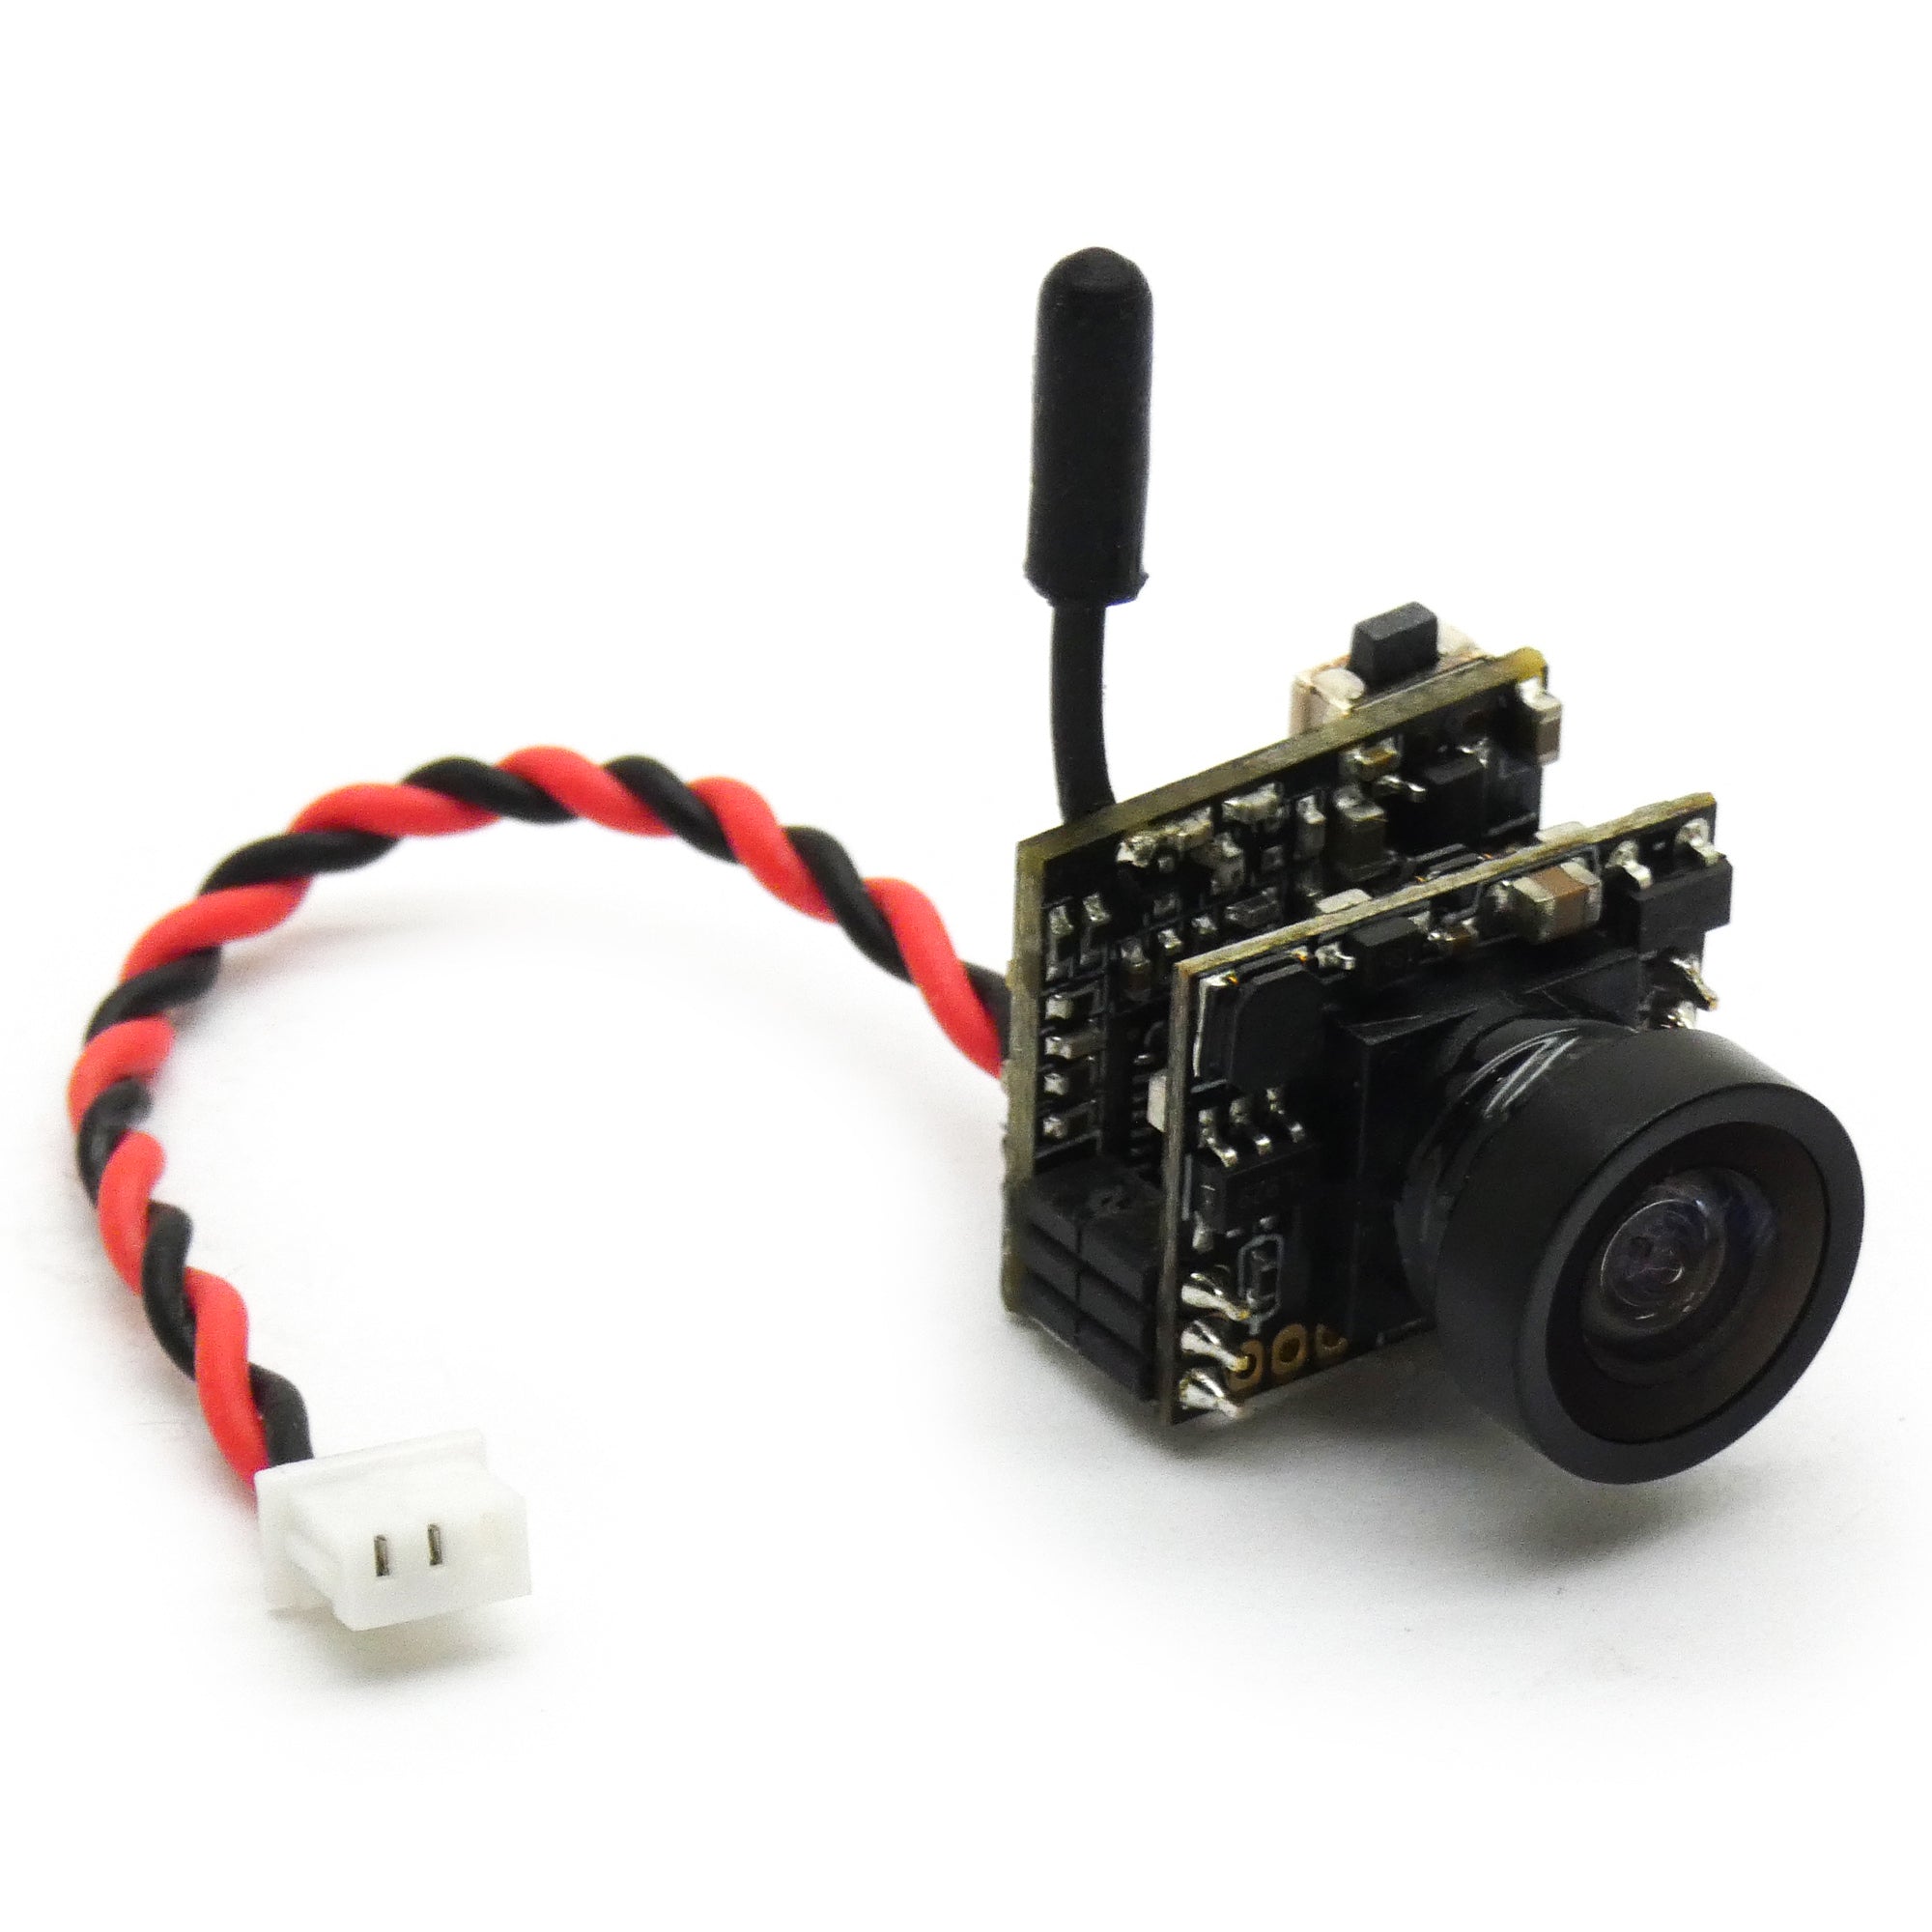 Micro FPV Camera Transmitter for Racing Drones